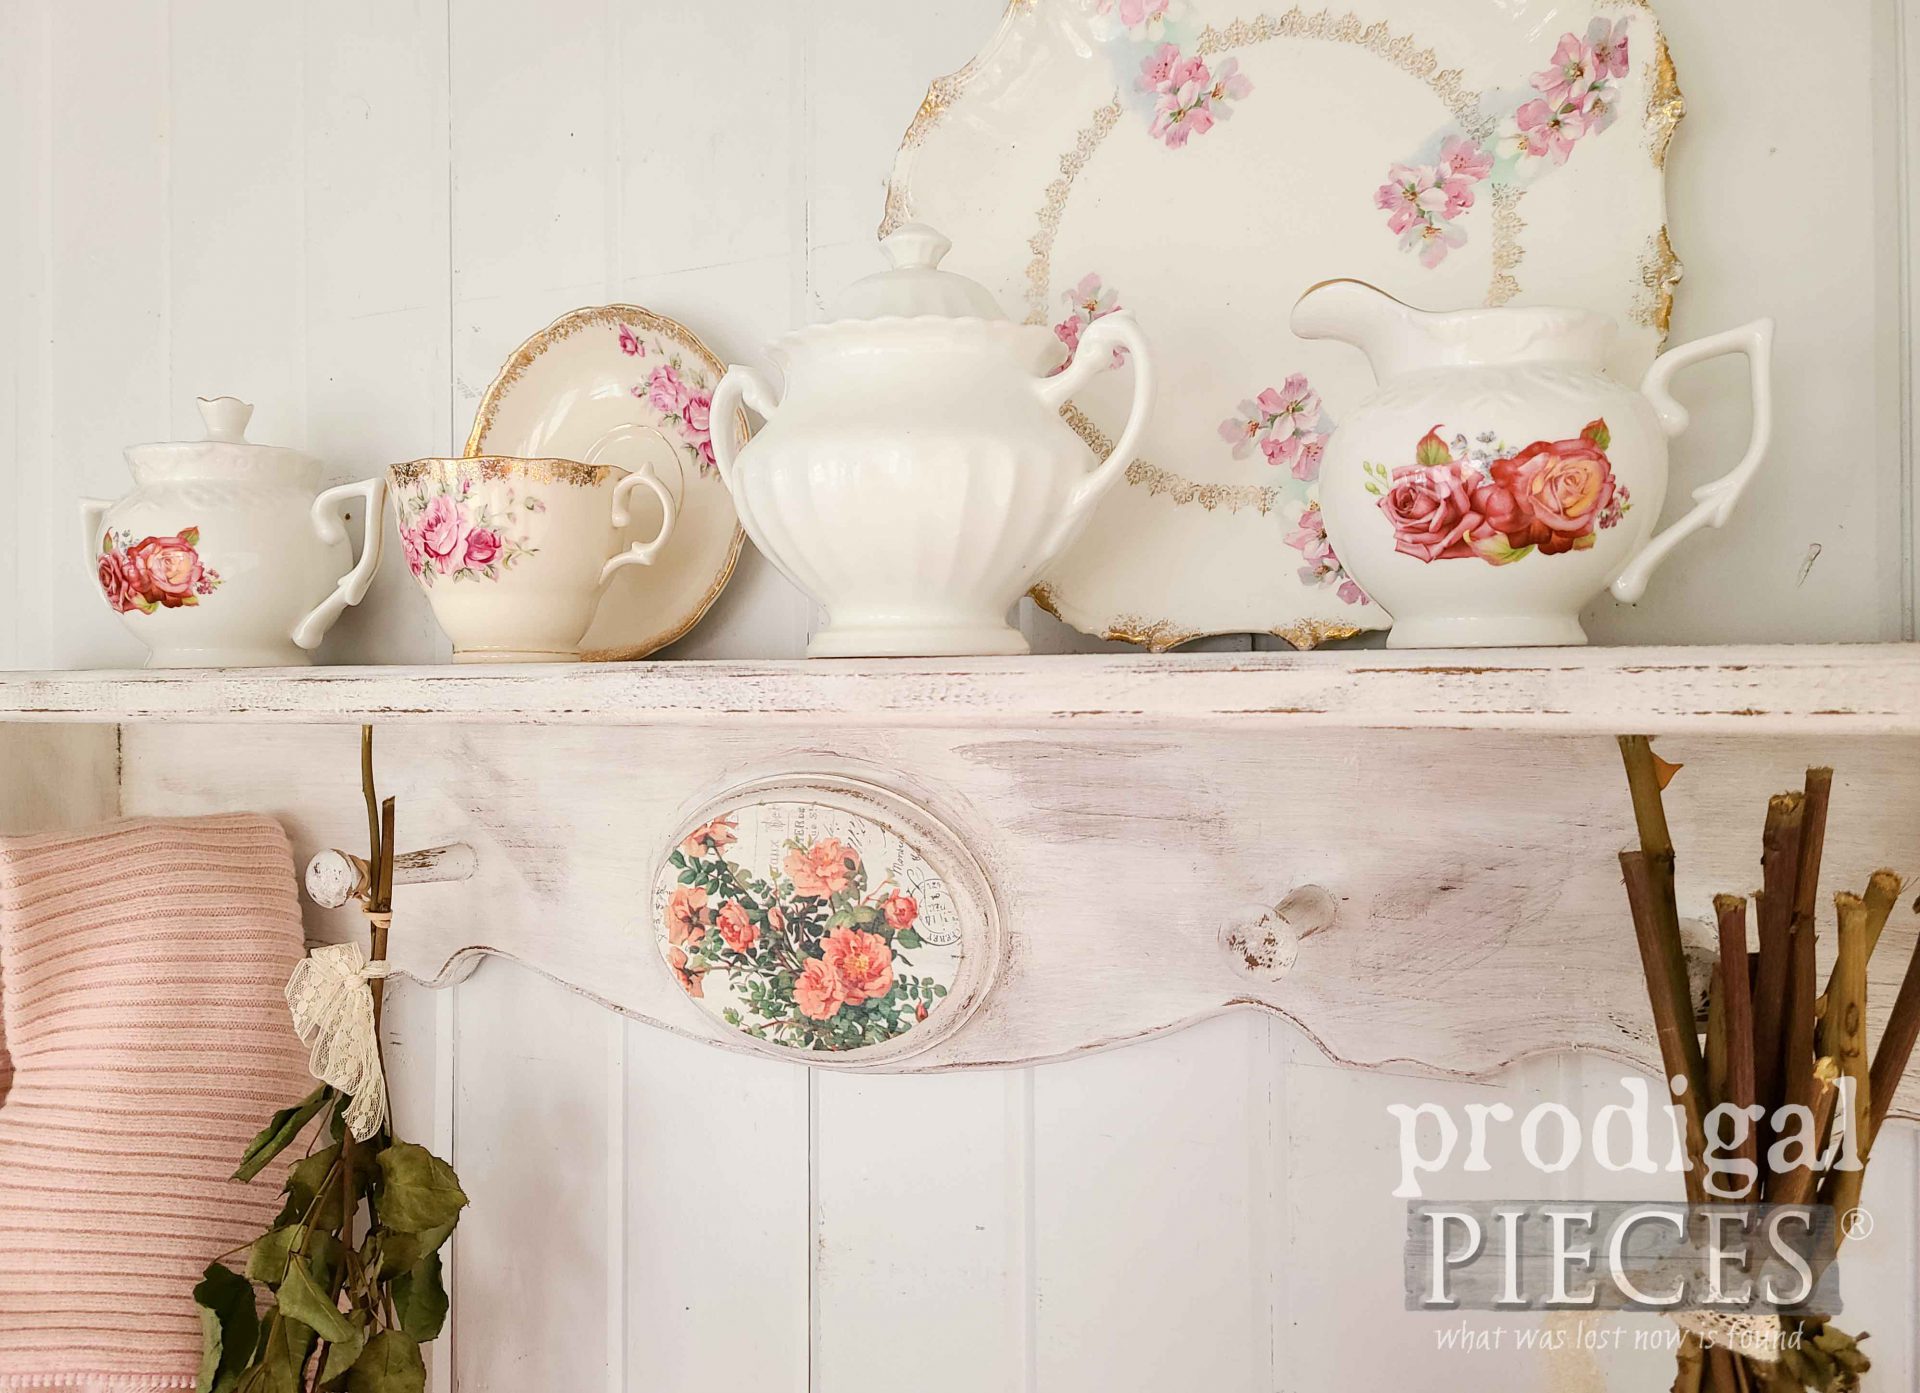 Handmade Shabby Chic Coat Rack with Shelf for Thrifty Decor Makeovers by Prodigal Pieces | prodigalpieces.com #prodigalpieces #shabbychic #diy #home #homedecor